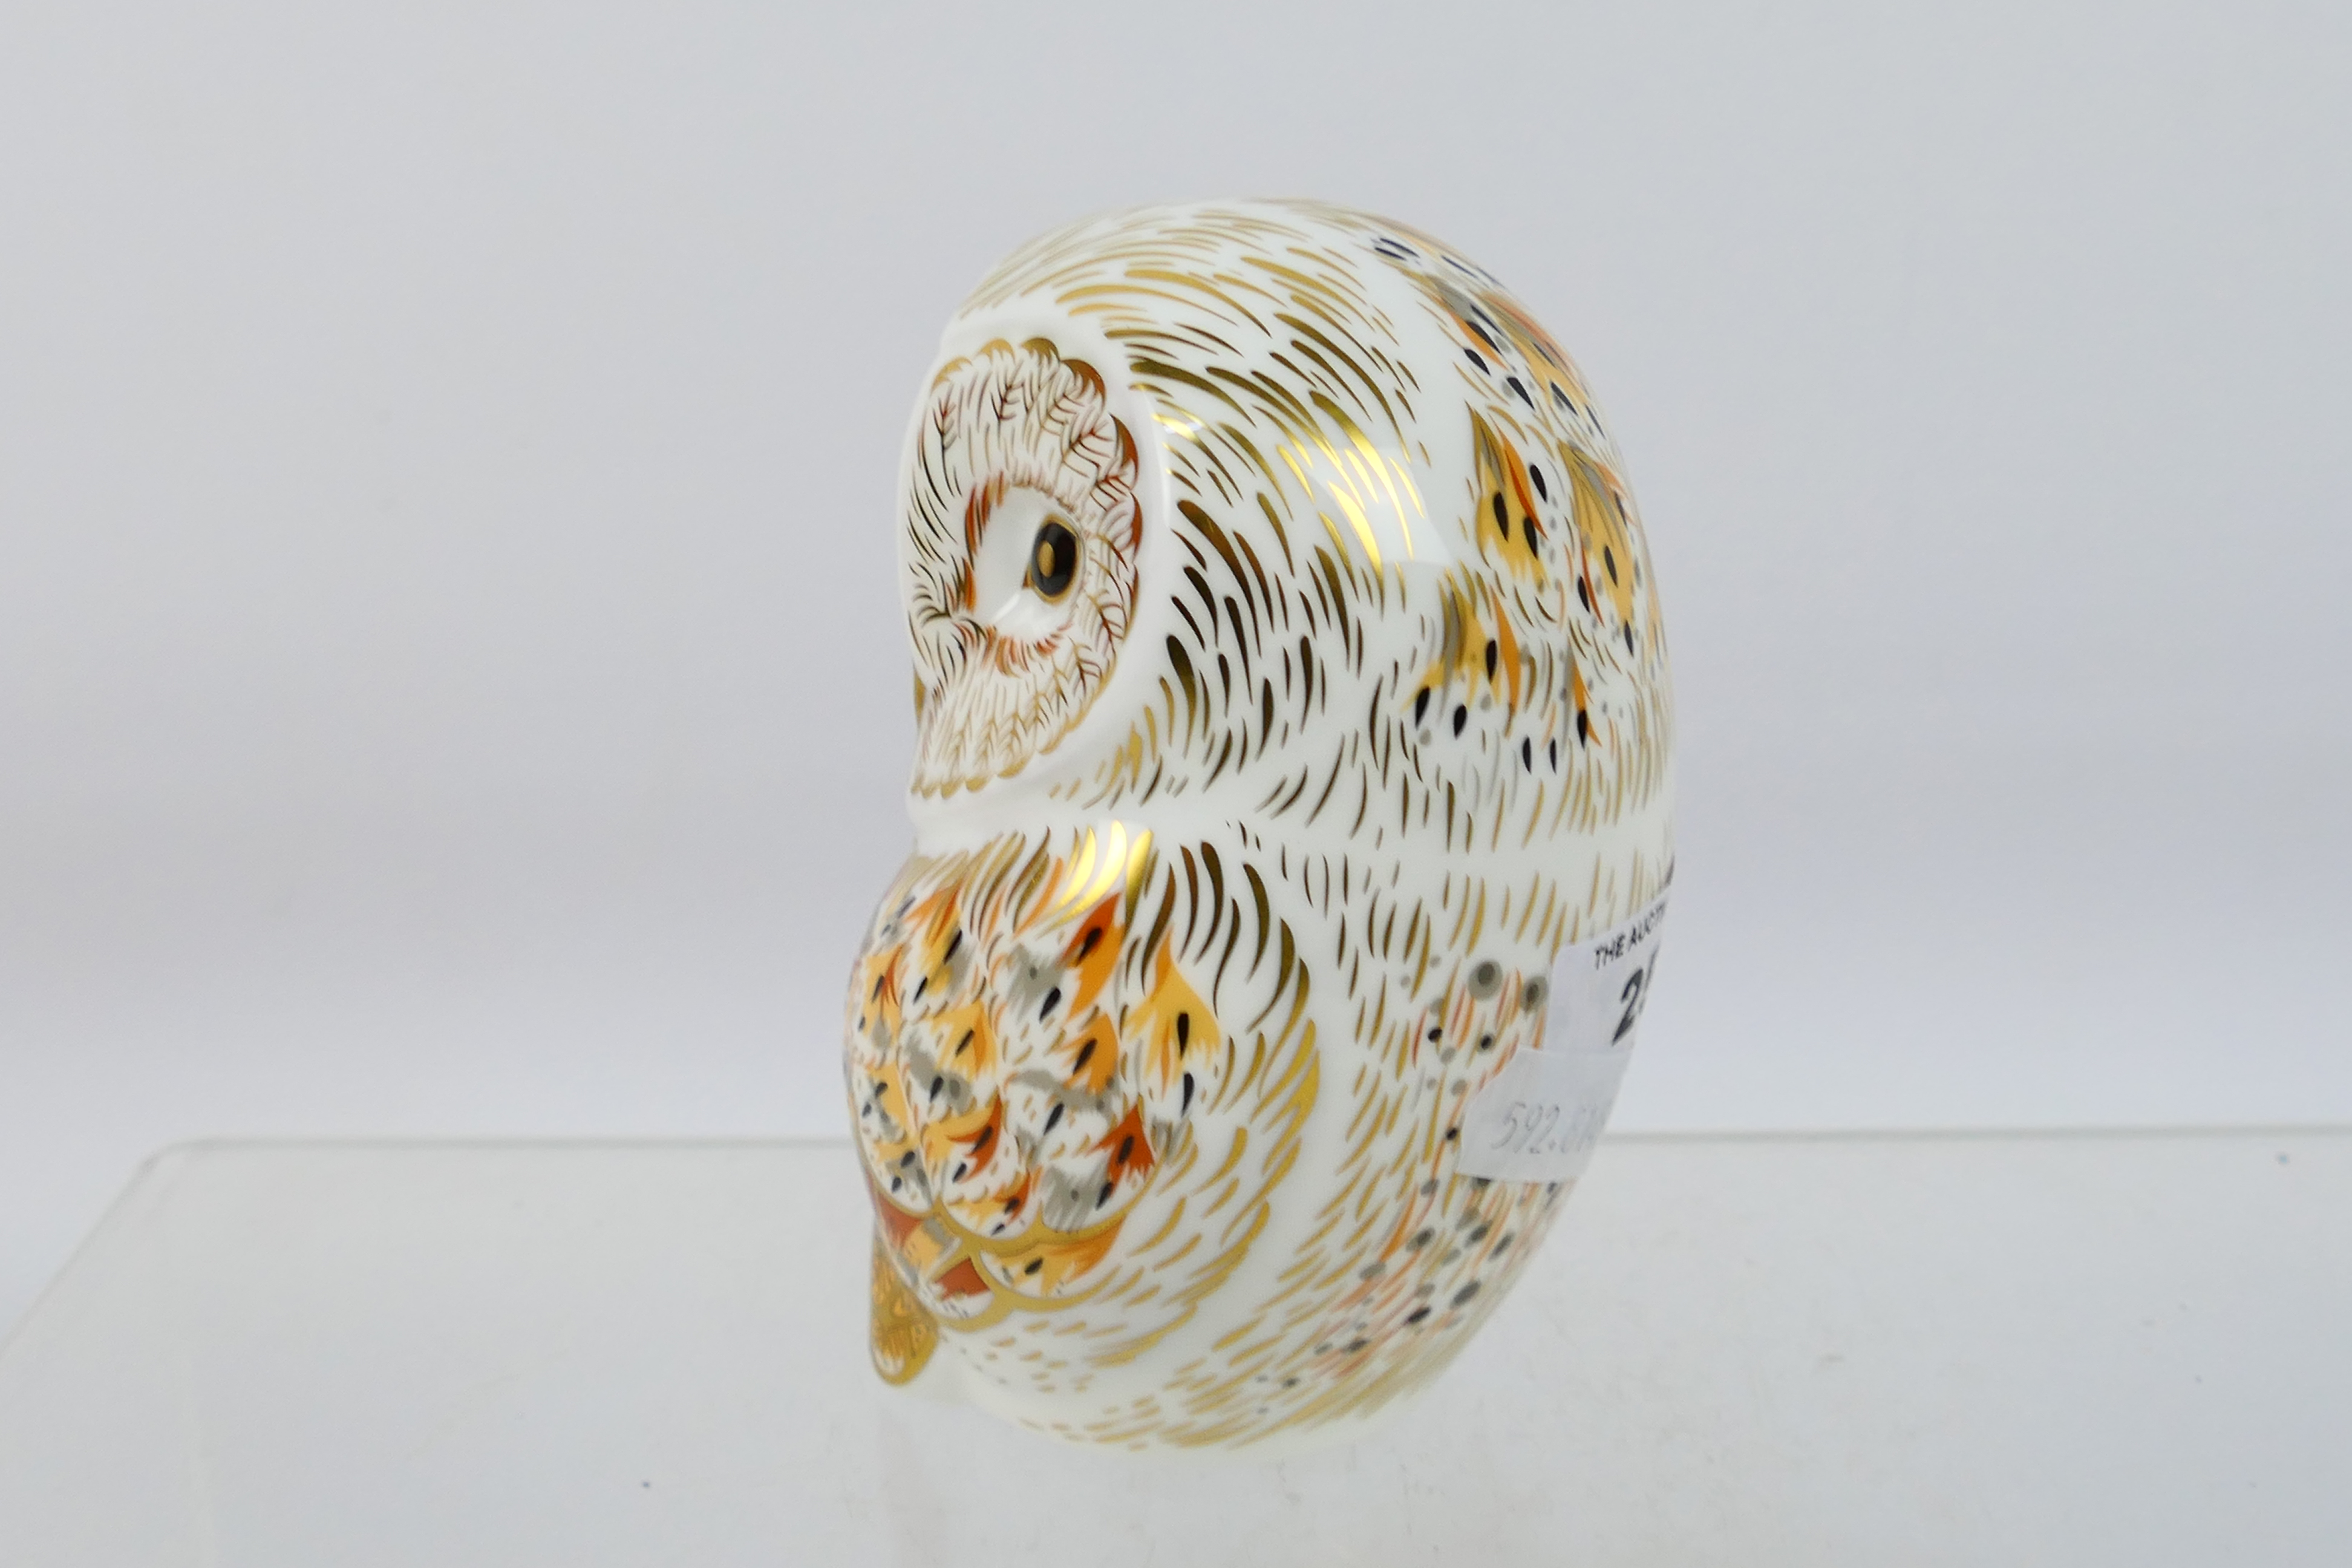 Royal Crown Derby - An owl form paperweight, Winter Owl, gold stopper, approximately 11 cm (h). - Image 2 of 4